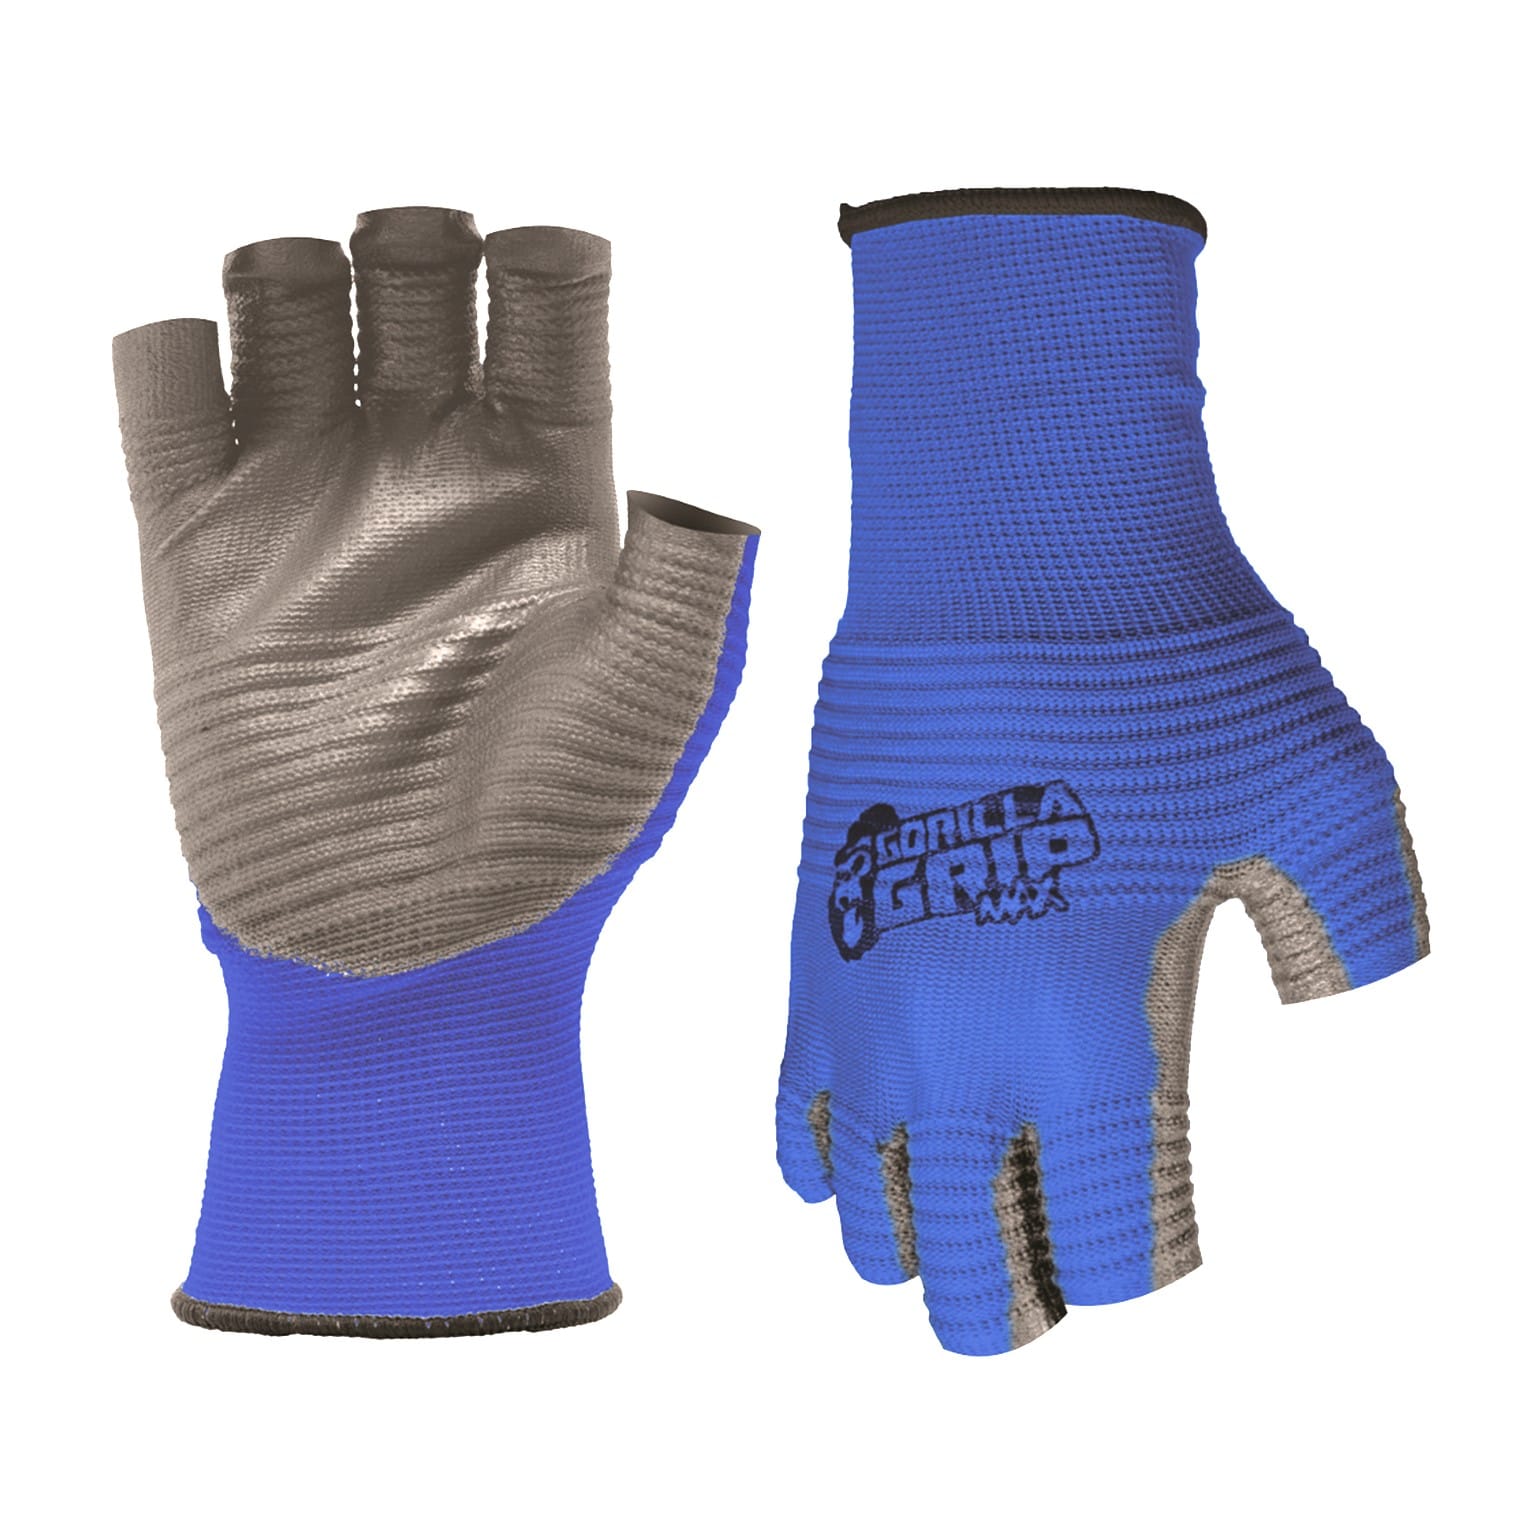 Breathable Fingerless Work and Fishing Gloves with Ribbed Gripping Surface Gorilla Grip MAX Fingerless Gloves Color: Blue and Black 1-Pair 